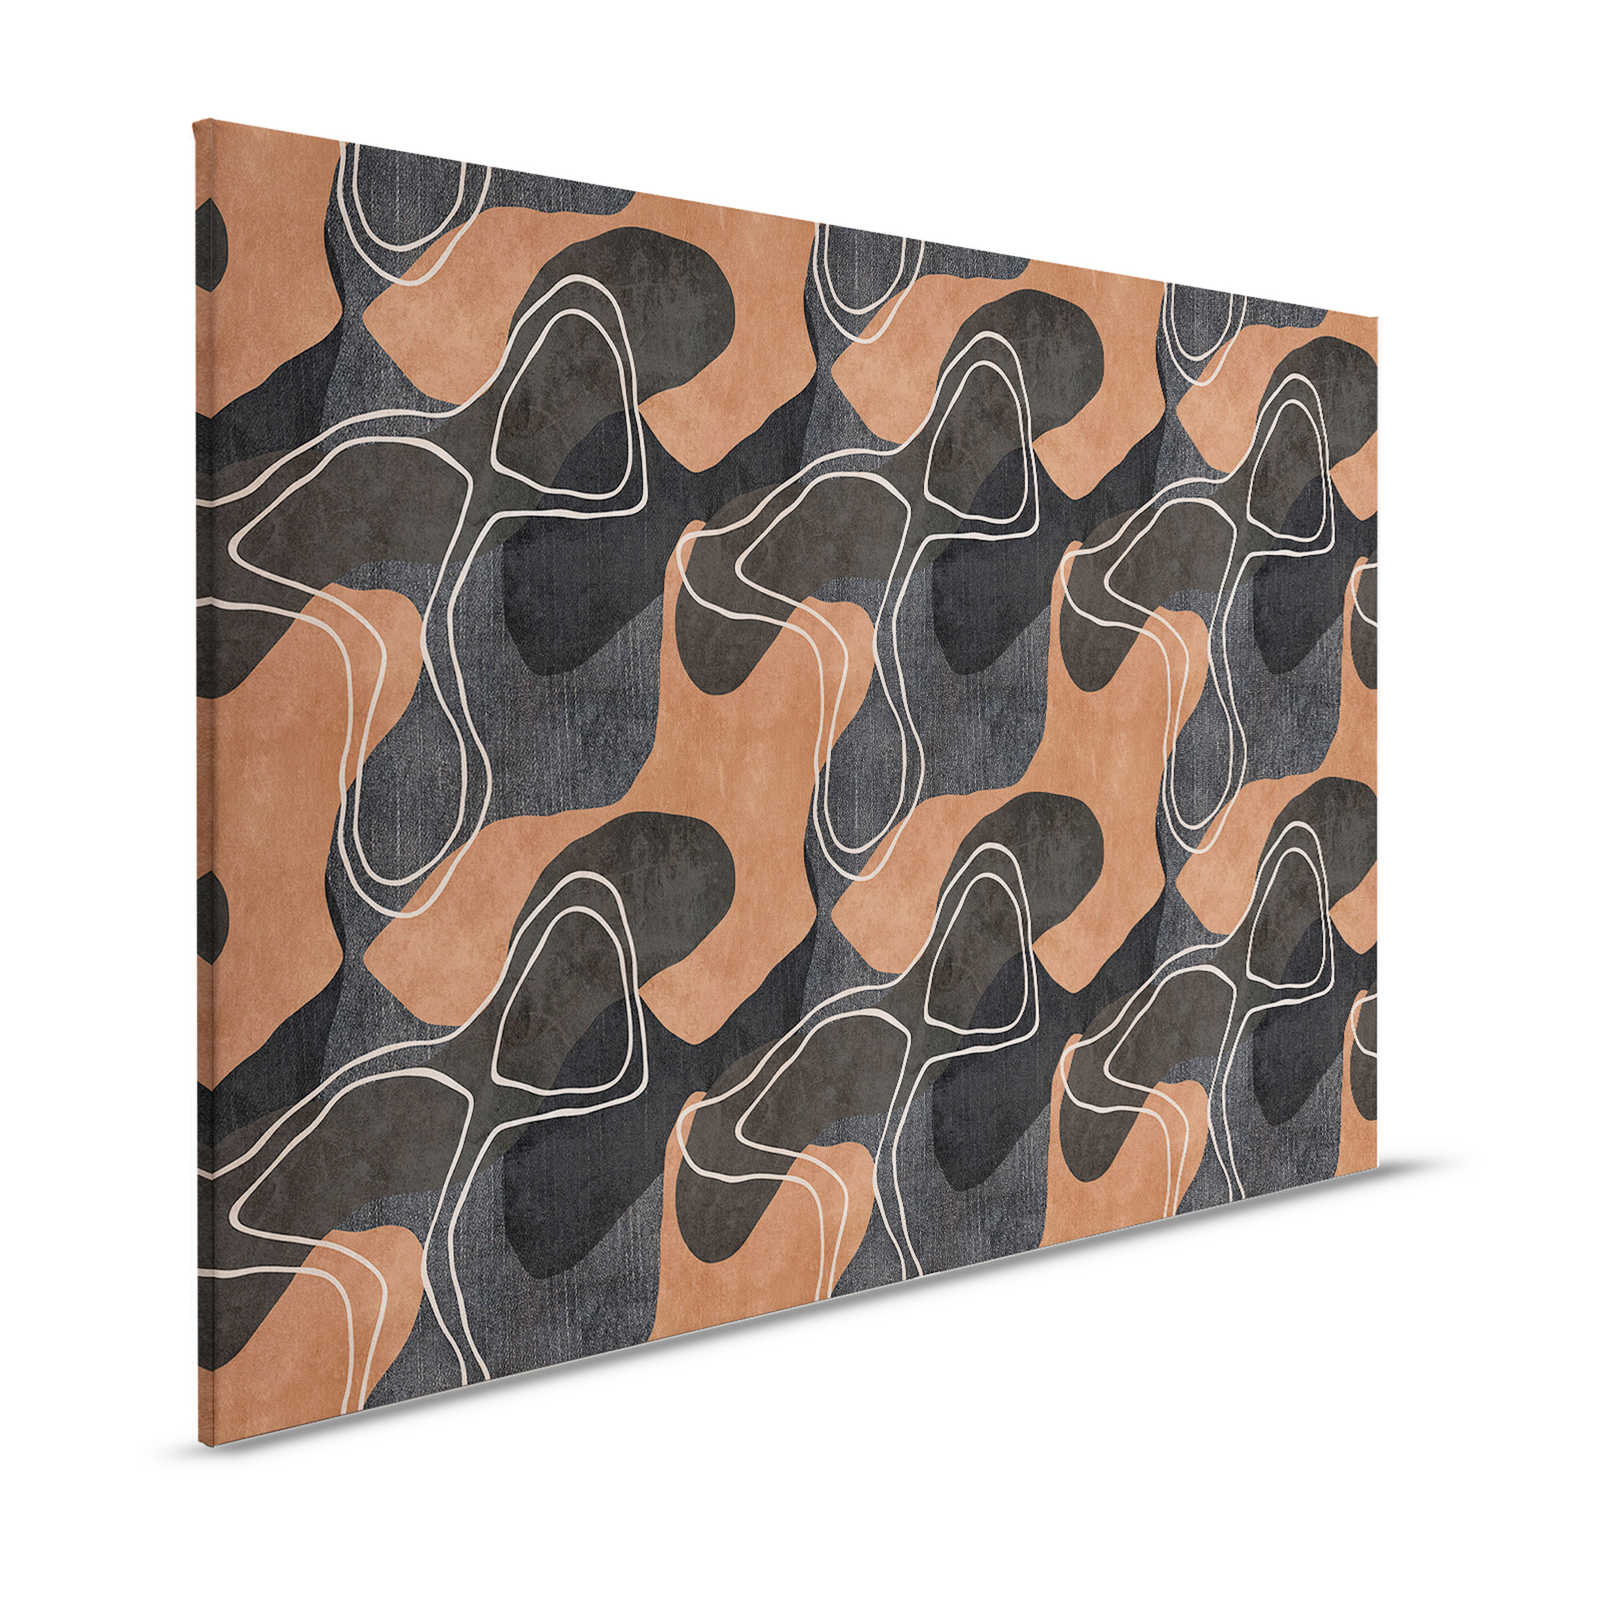 Terra 1 - Ethno canvas painting with abstract design in earth tones - 1.20 m x 0.80 m
